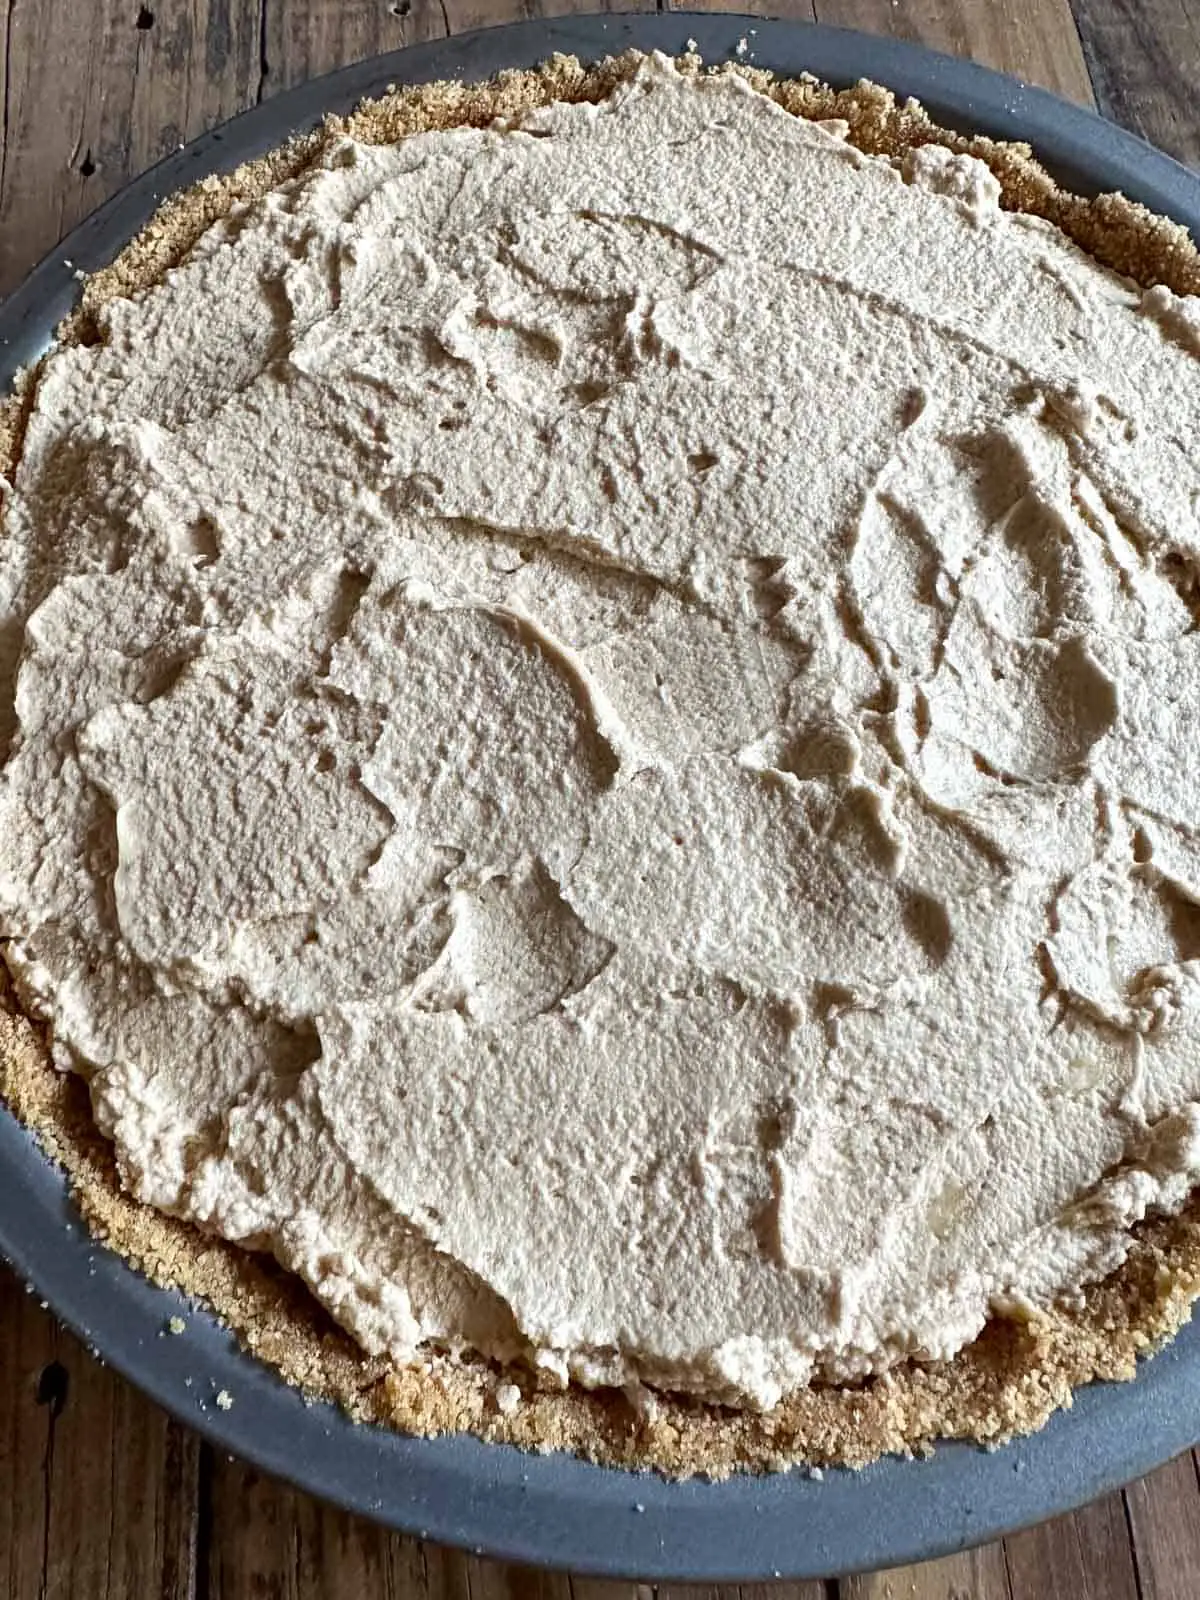 A banoffee pie in a pie pan. You can see the graham cracker crust and whipped cream topping.